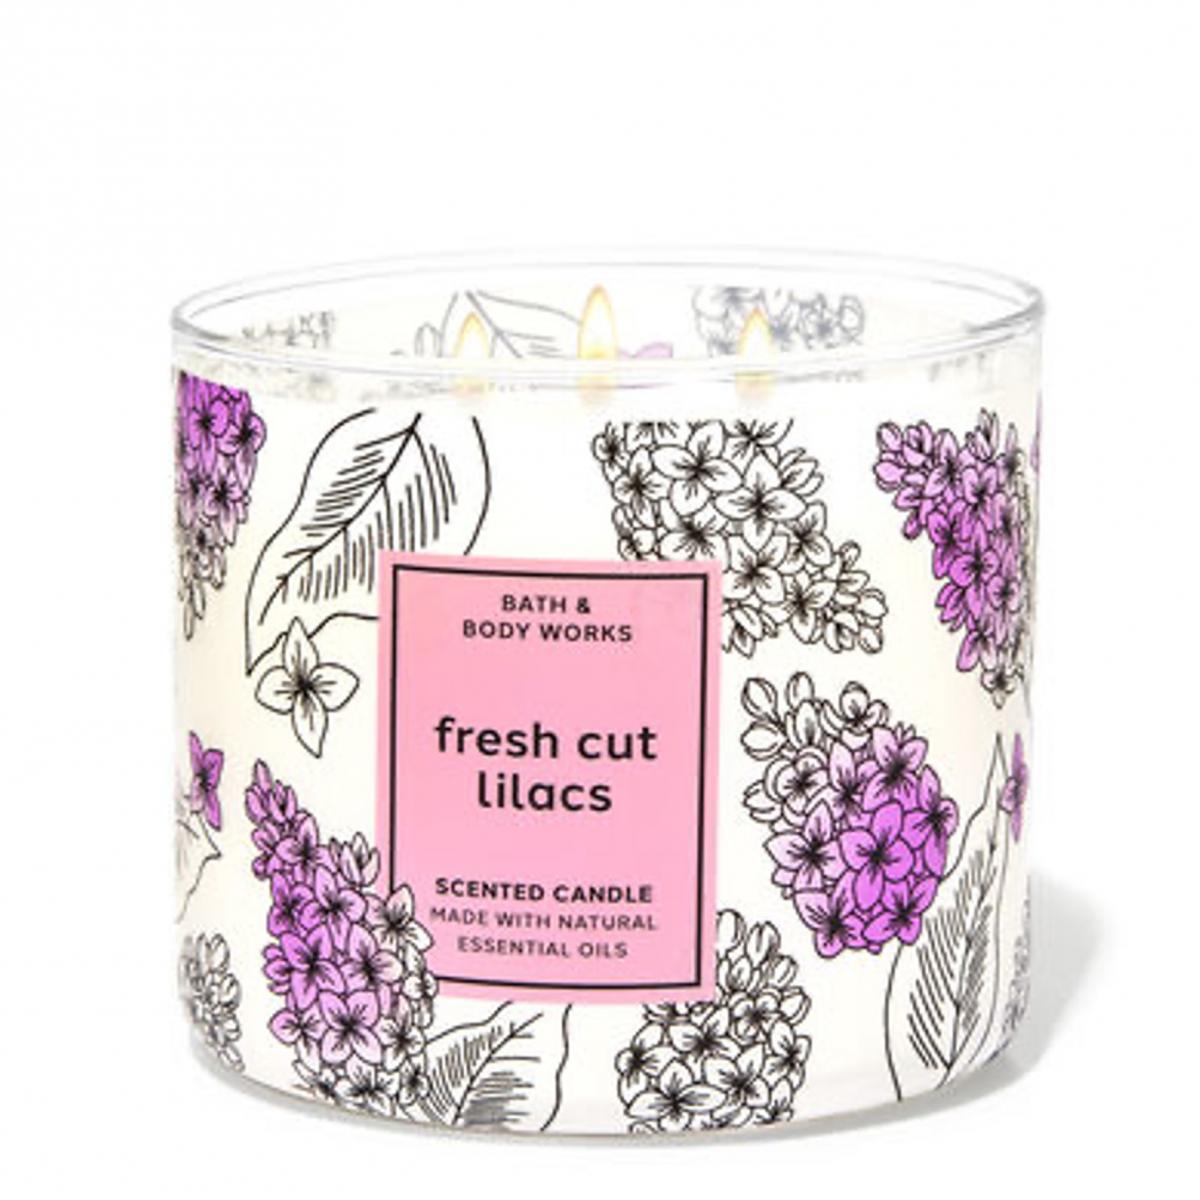 FRESH CUT LILACS 3-Wick Candle 14.5oz / 411g (Parallel Imported Goods)